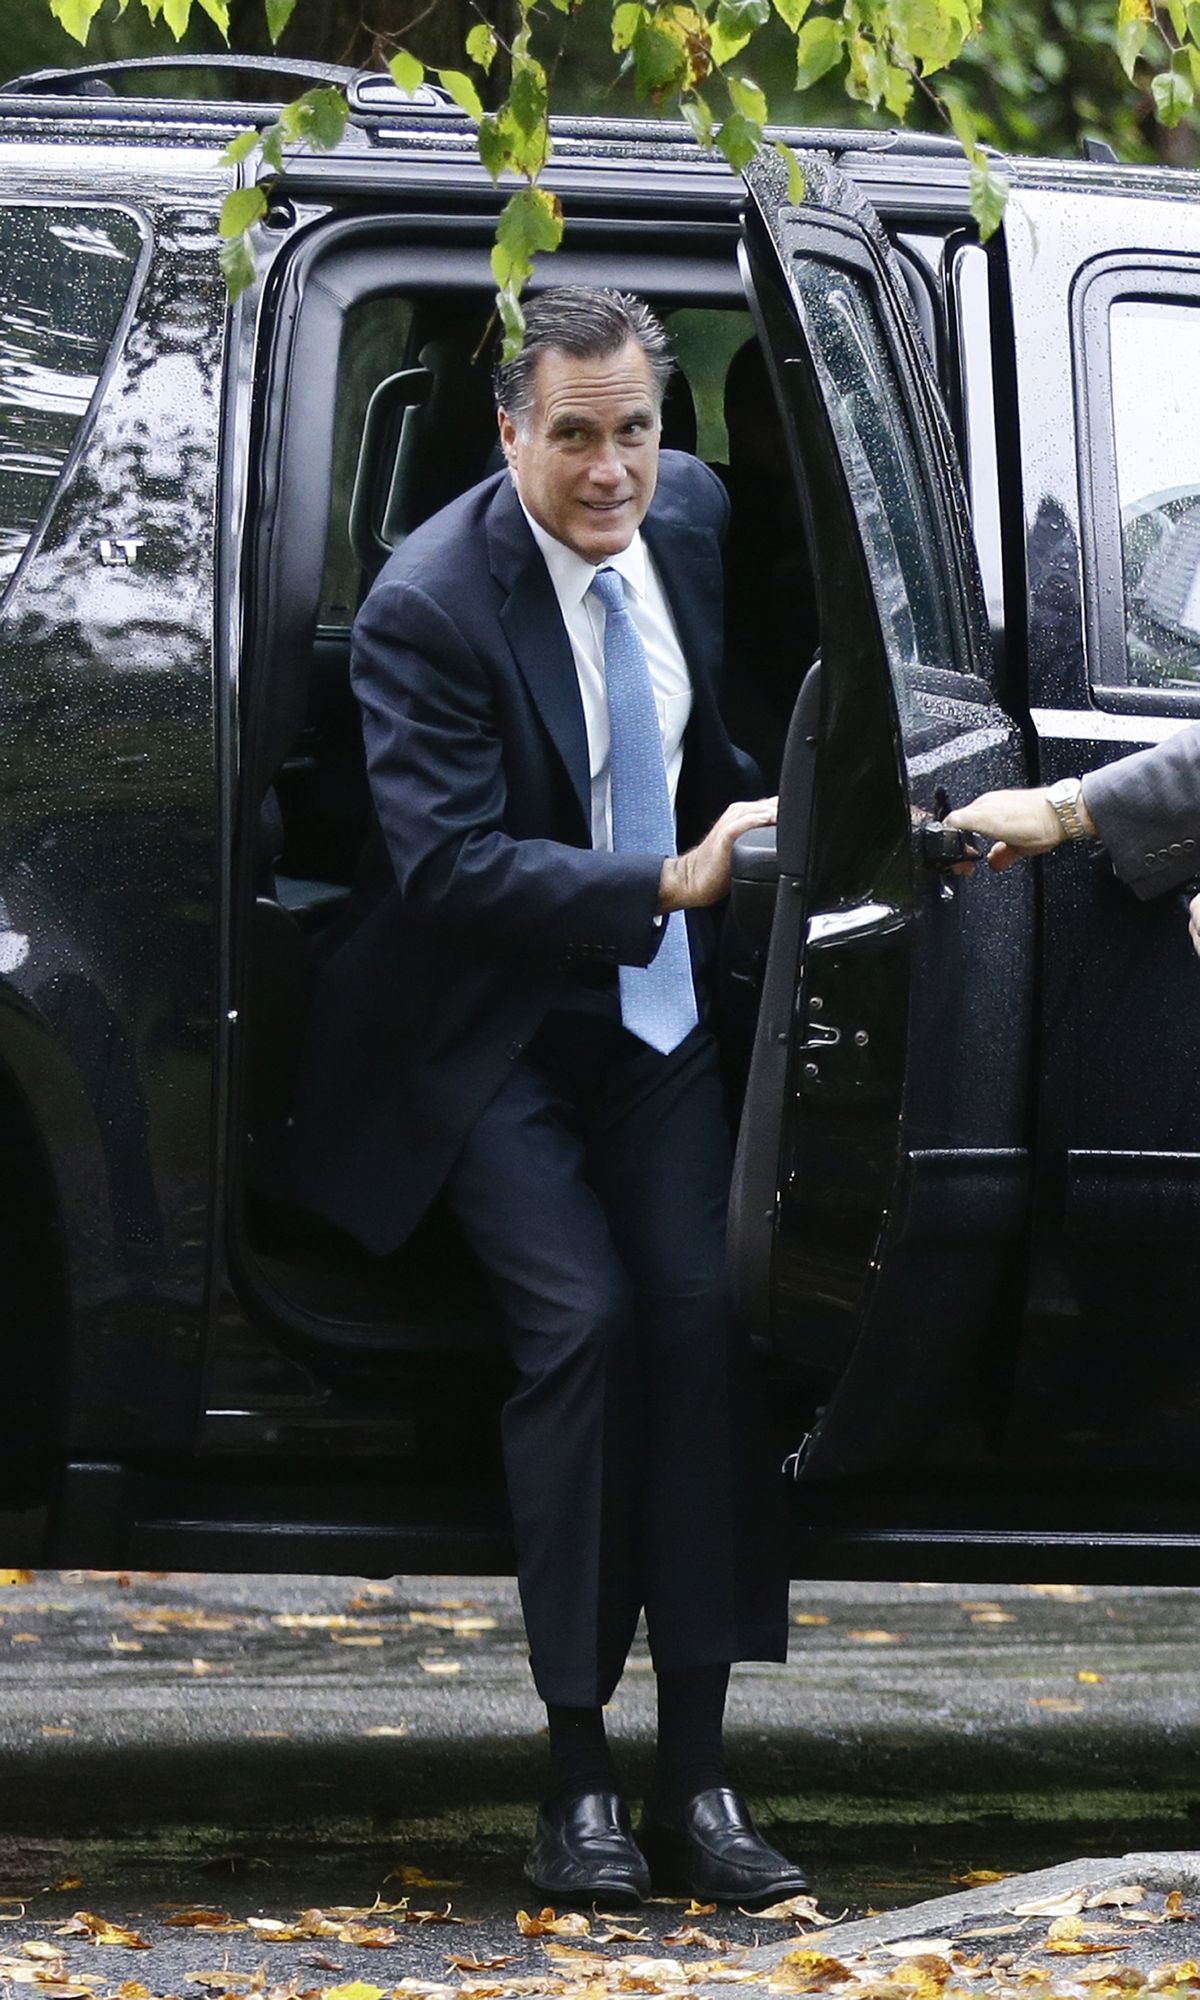 Republican presidential candidate and former Massachusetts Gov. Mitt Romney arrives for services at the Church of Jesus Christ of Latter-day Saints, in Belmont, Mass., Sunday, Sept. 30, 2012. (Charles Dharapak / Associated Press)